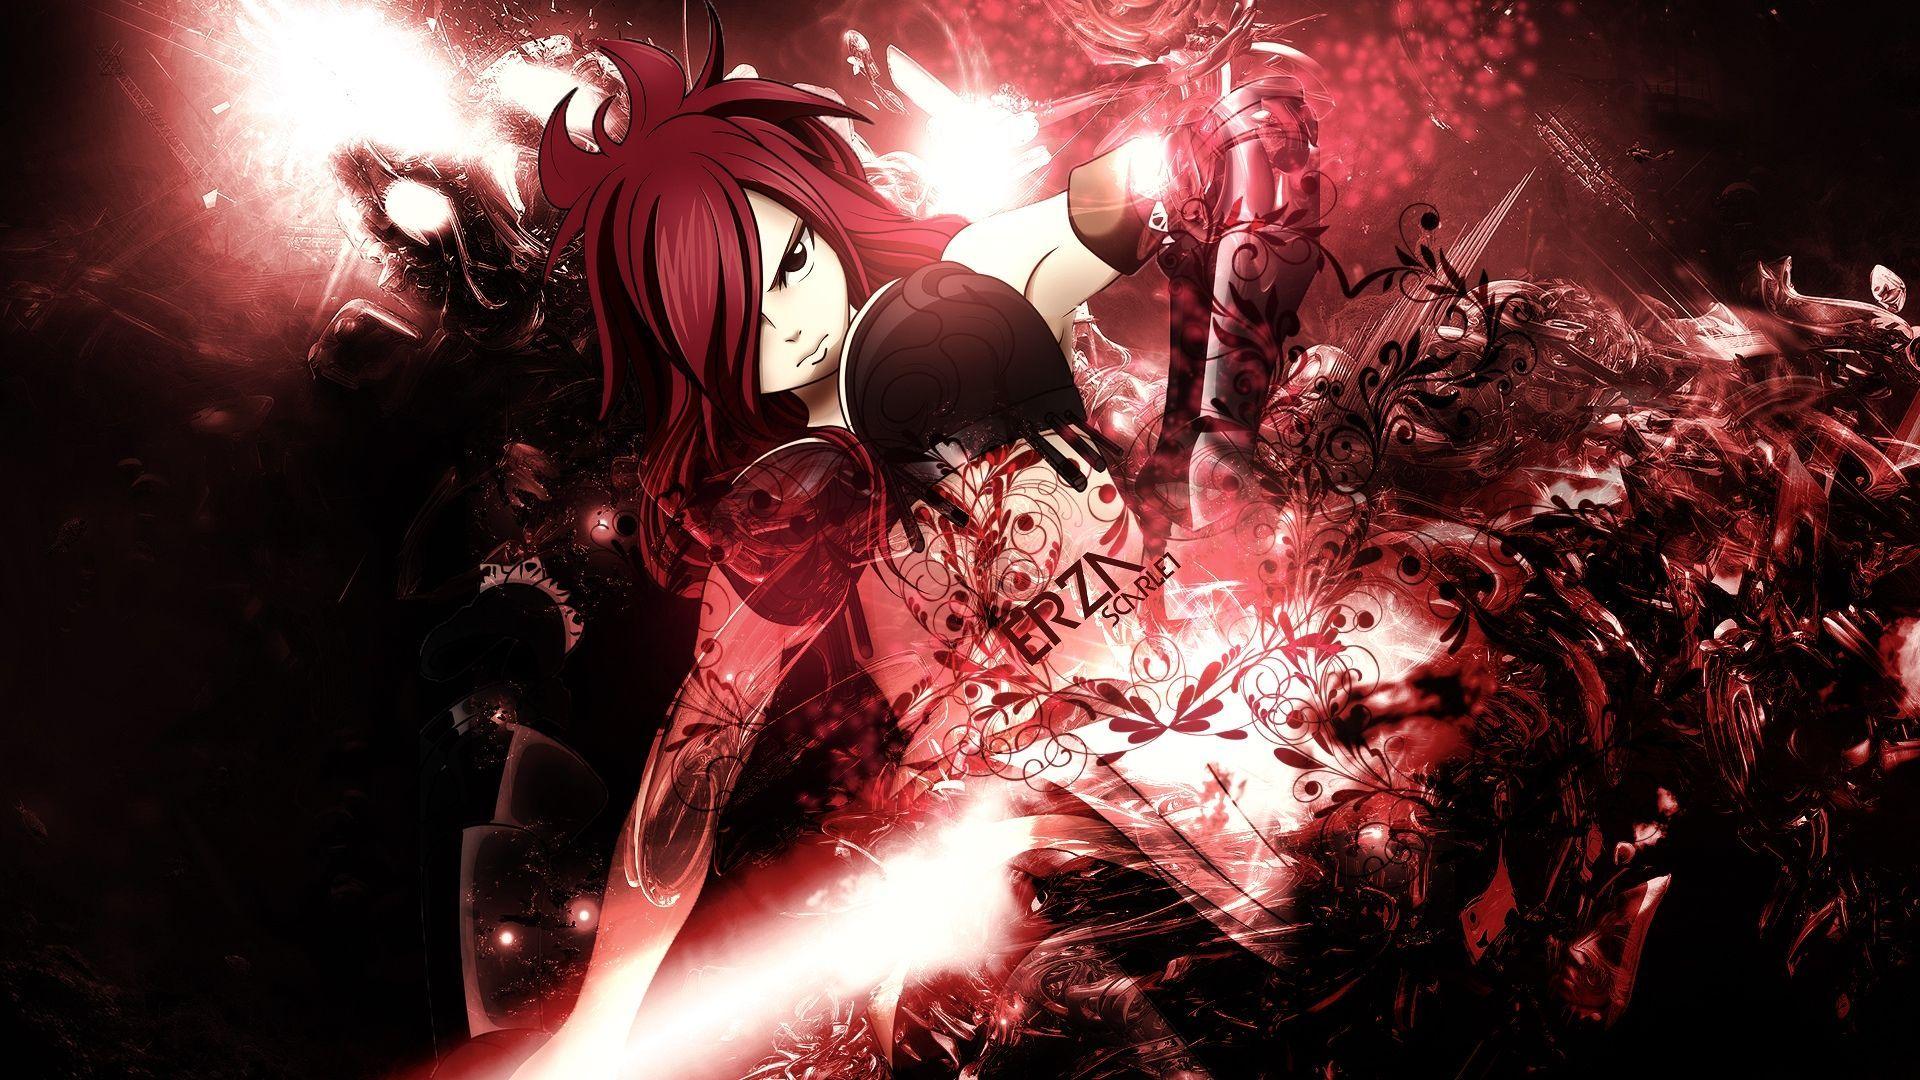 Erza Scarlet Wallpapers Wallpaper Cave